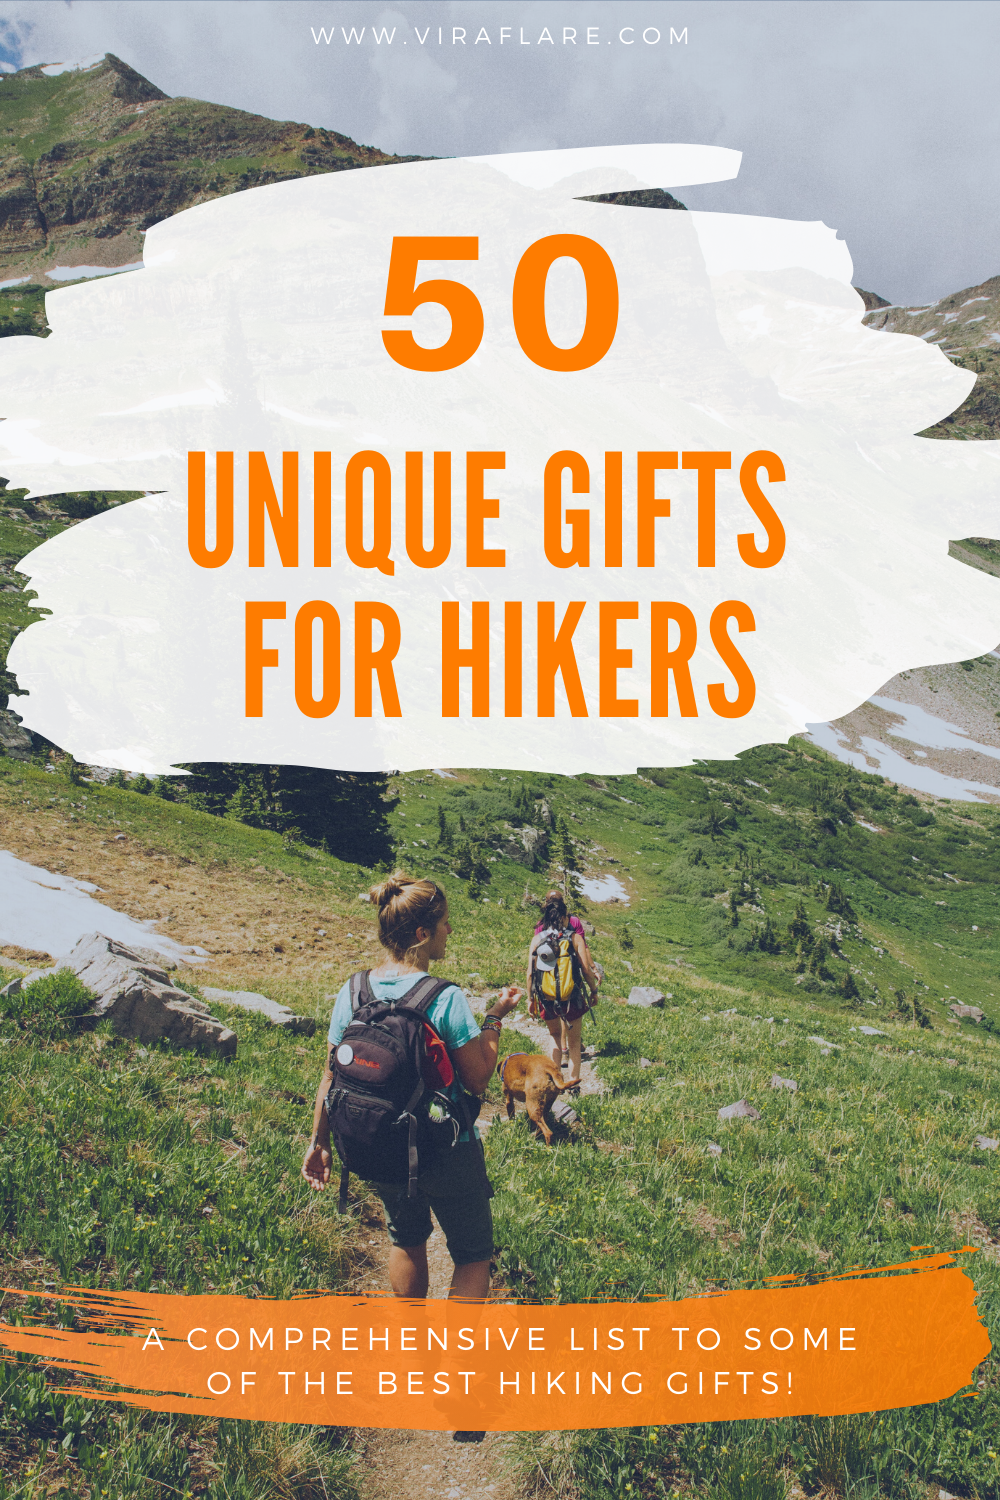 Gifts for hikers